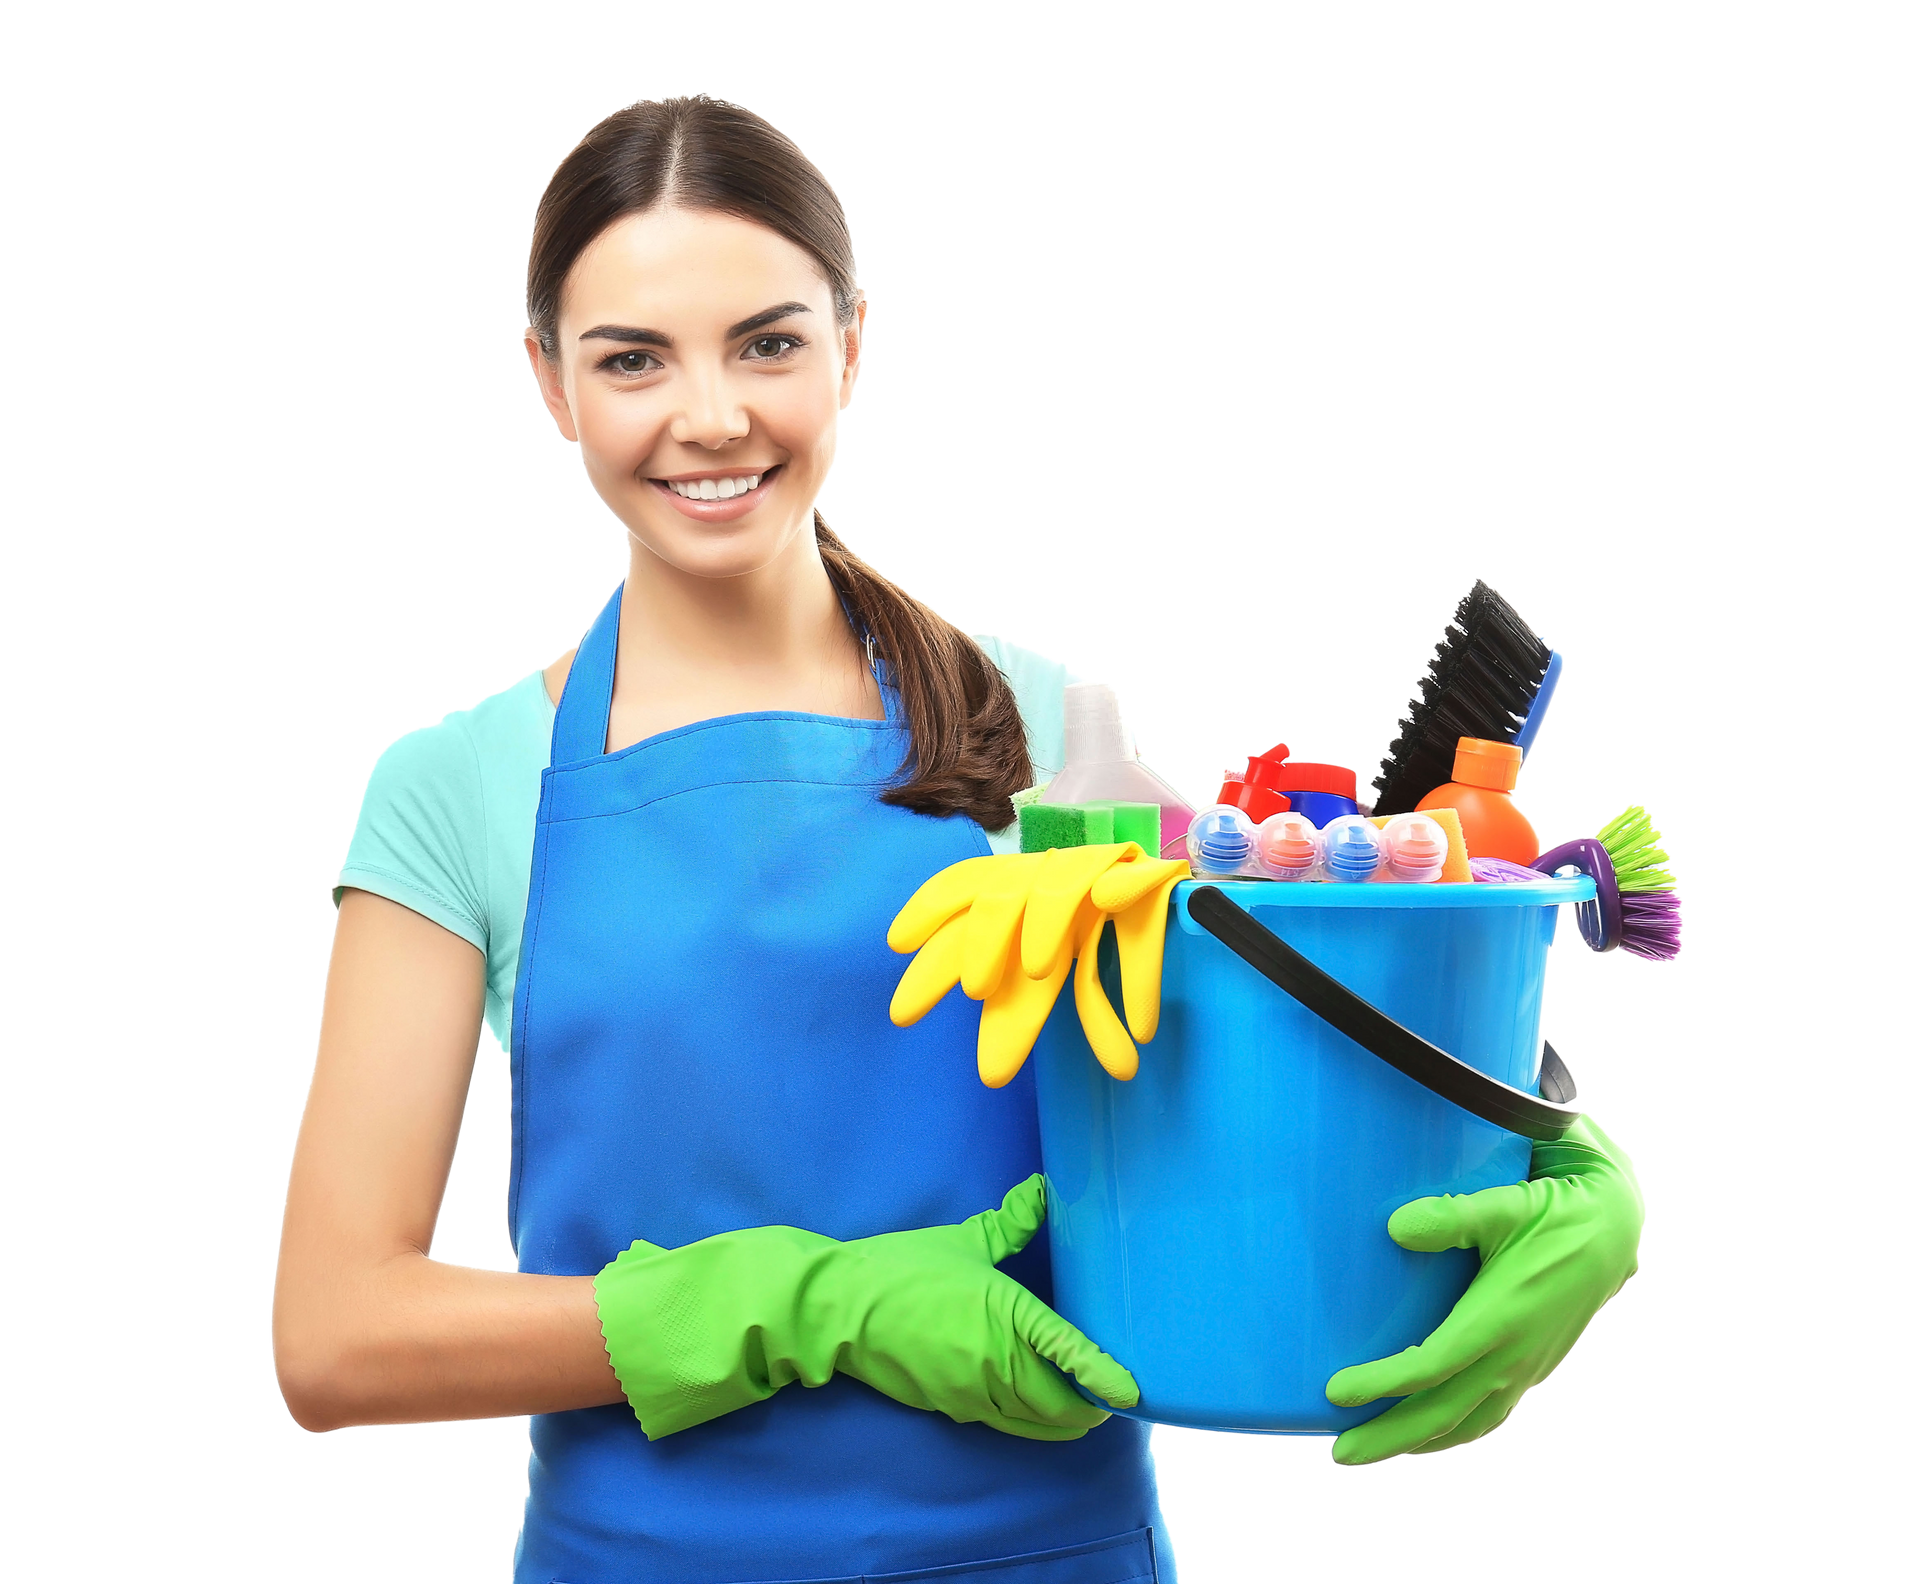 Young woman holding cleaning tools and products in bucket, isolated.